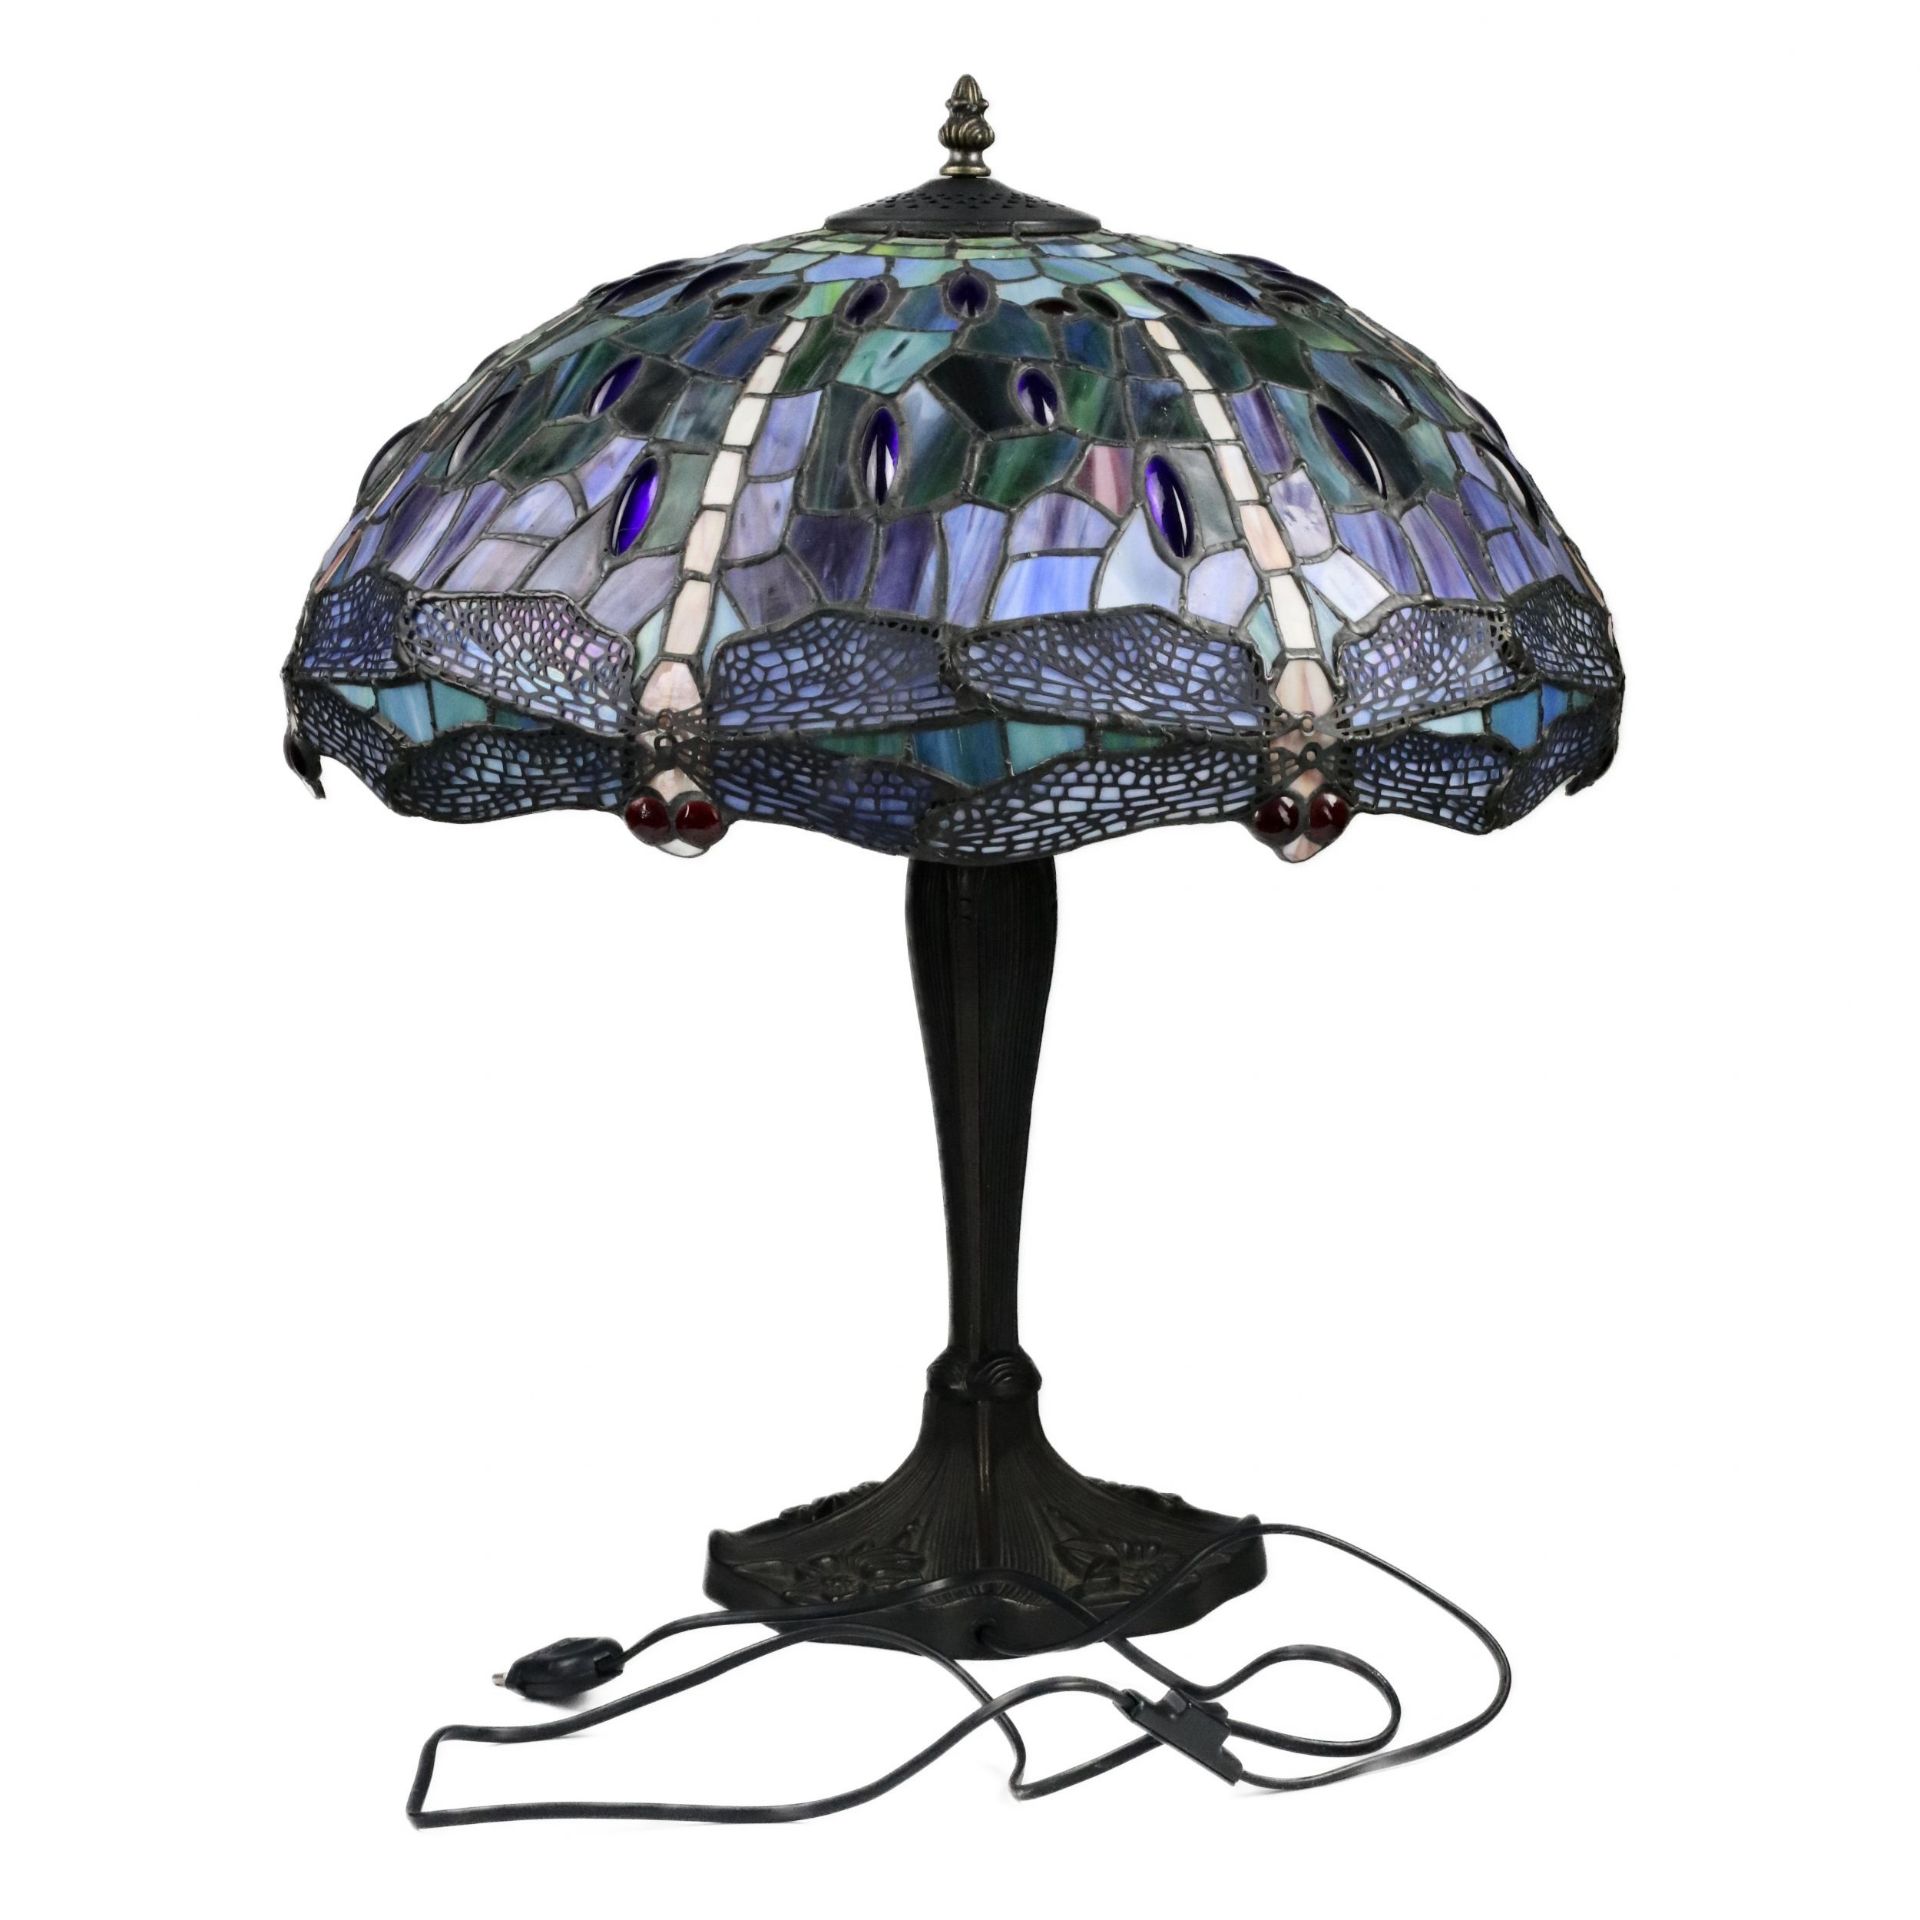 Stained glass lamp in Tiffany style. 20th century. - Image 4 of 5